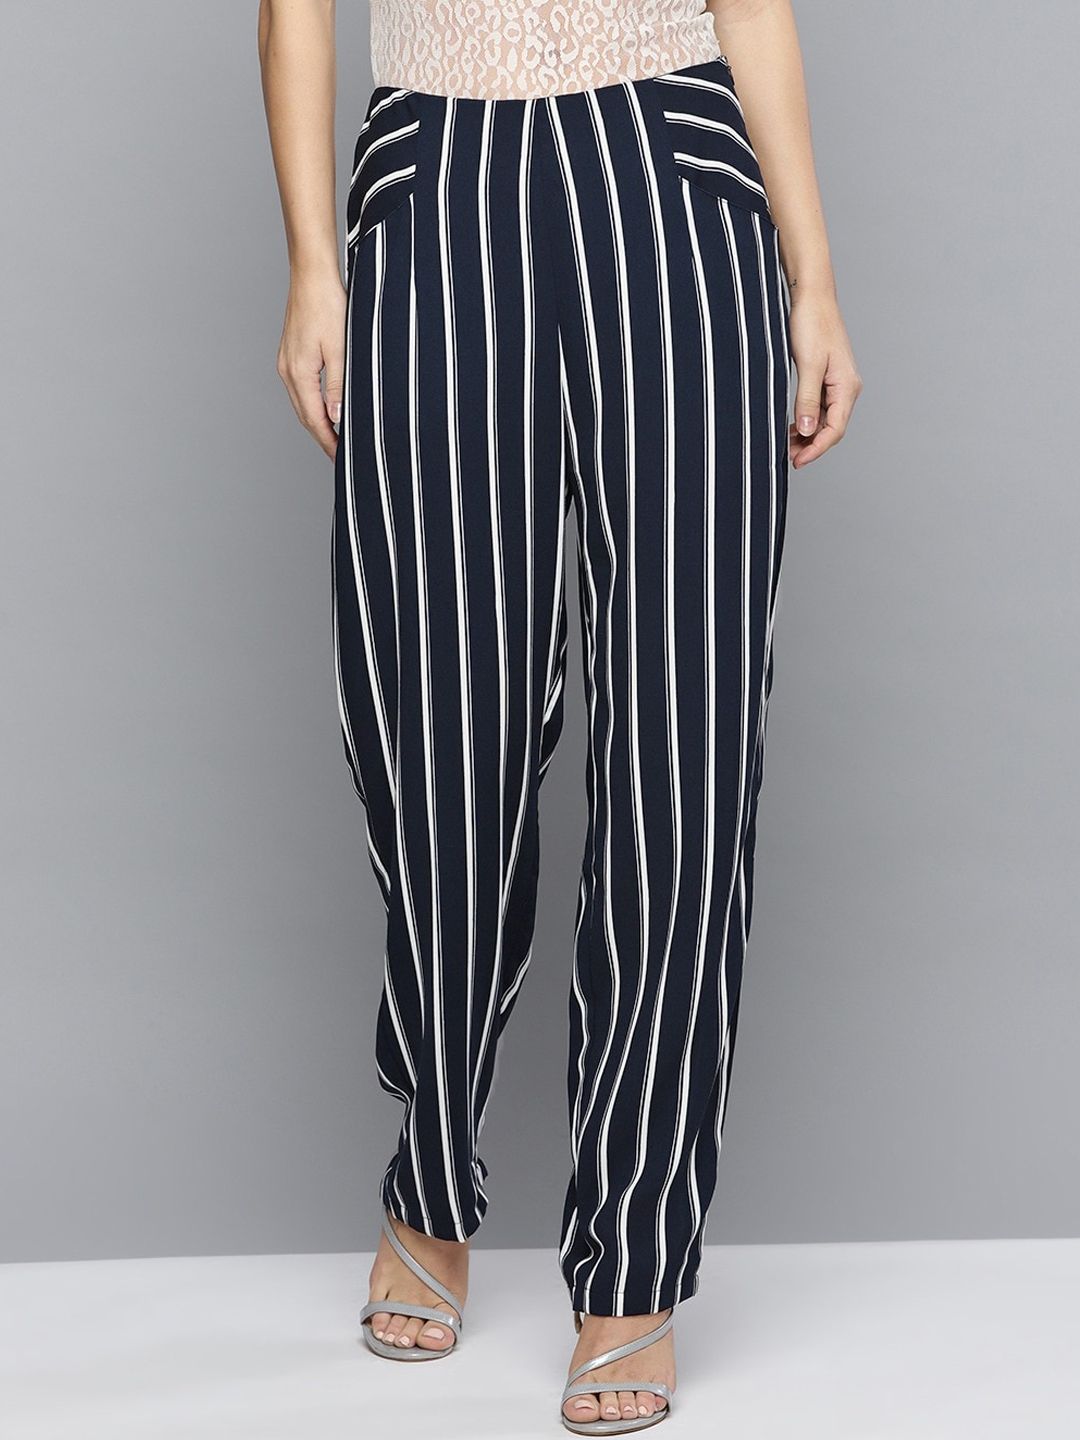 Marie Claire Women Vertical Striped Mid Rise Parallel Trousers Price in India